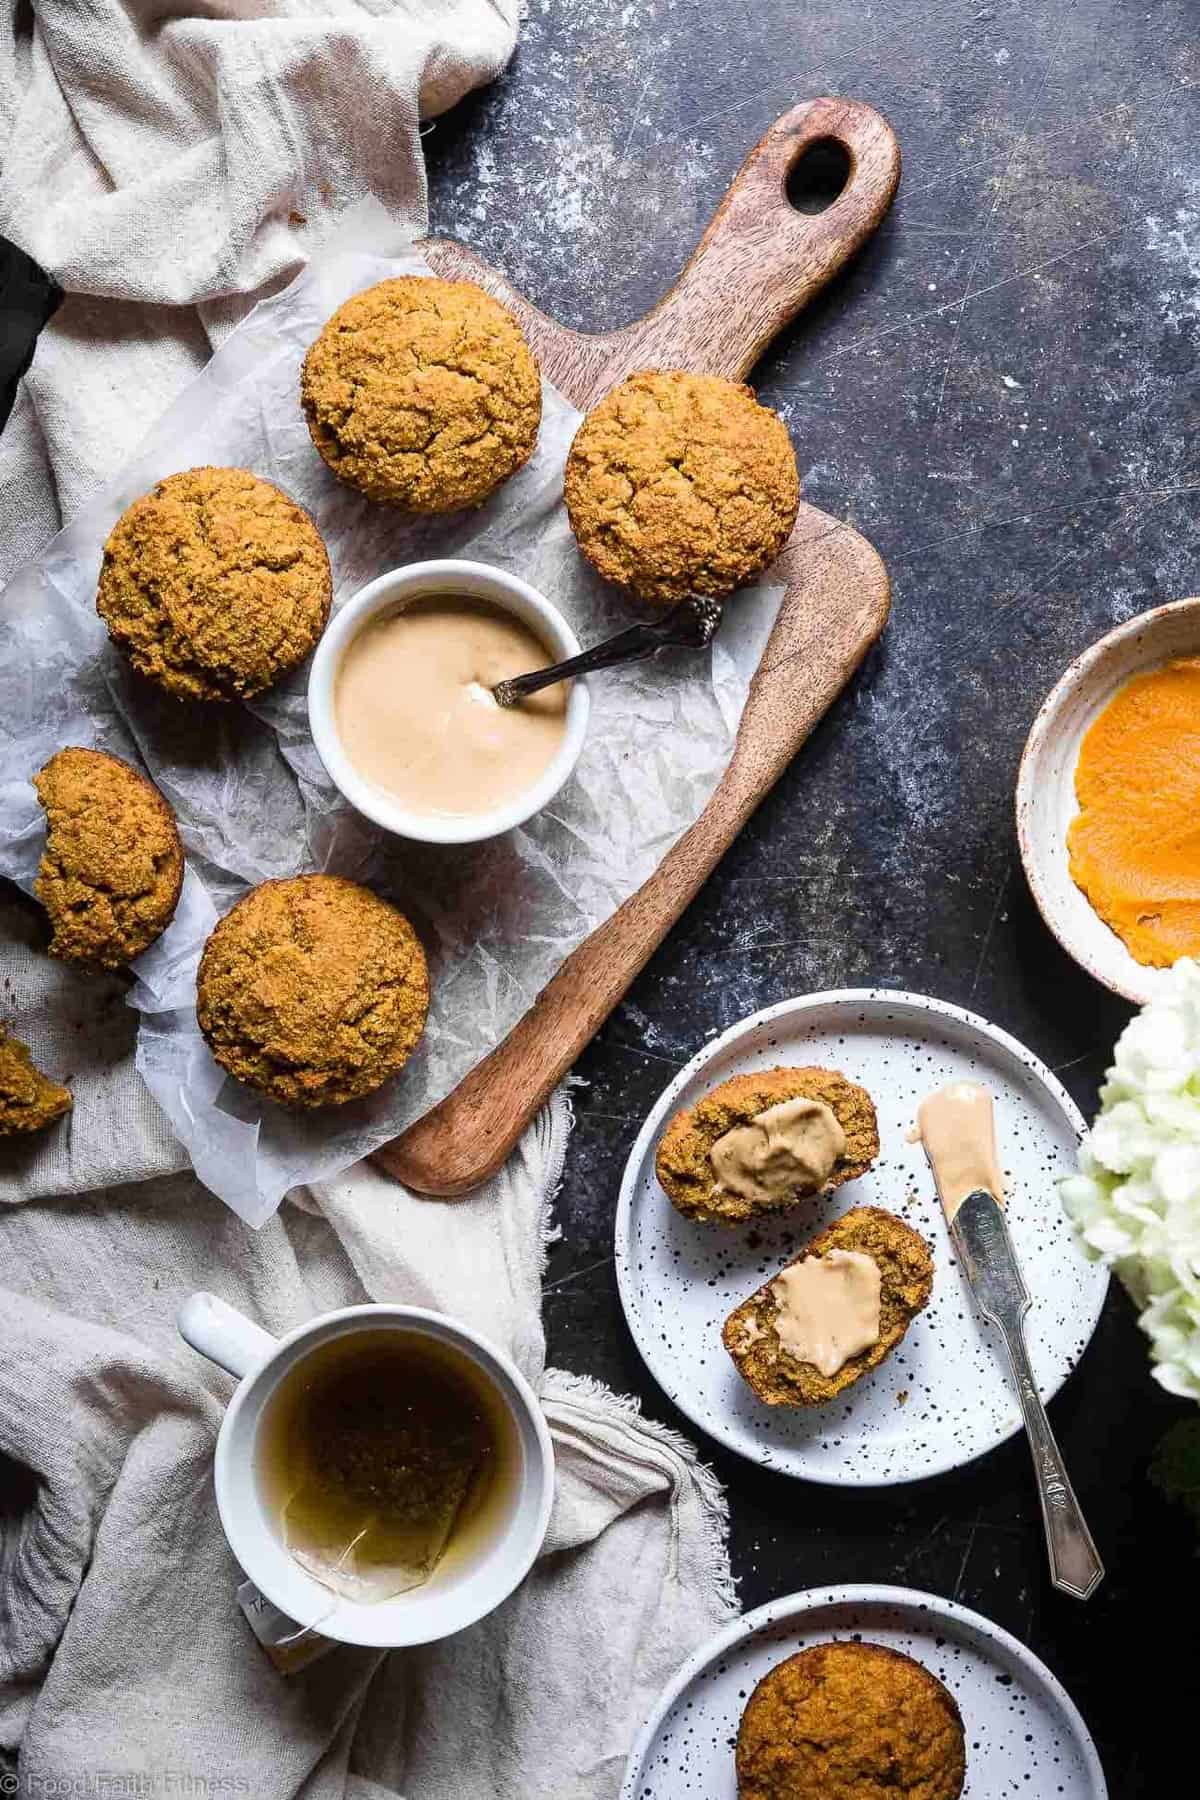 Paleo pumpkin muffin - These quick and easy, healthy almond flour pumpkin muffins are SO spicy-sweet and FLUFFY! A yummy, fall breakfast or snack that kids or adults will LOVE! | #Foodfaithfitness | #Glutenfree #Paleo #Healthy #Pumpkin #Muffins